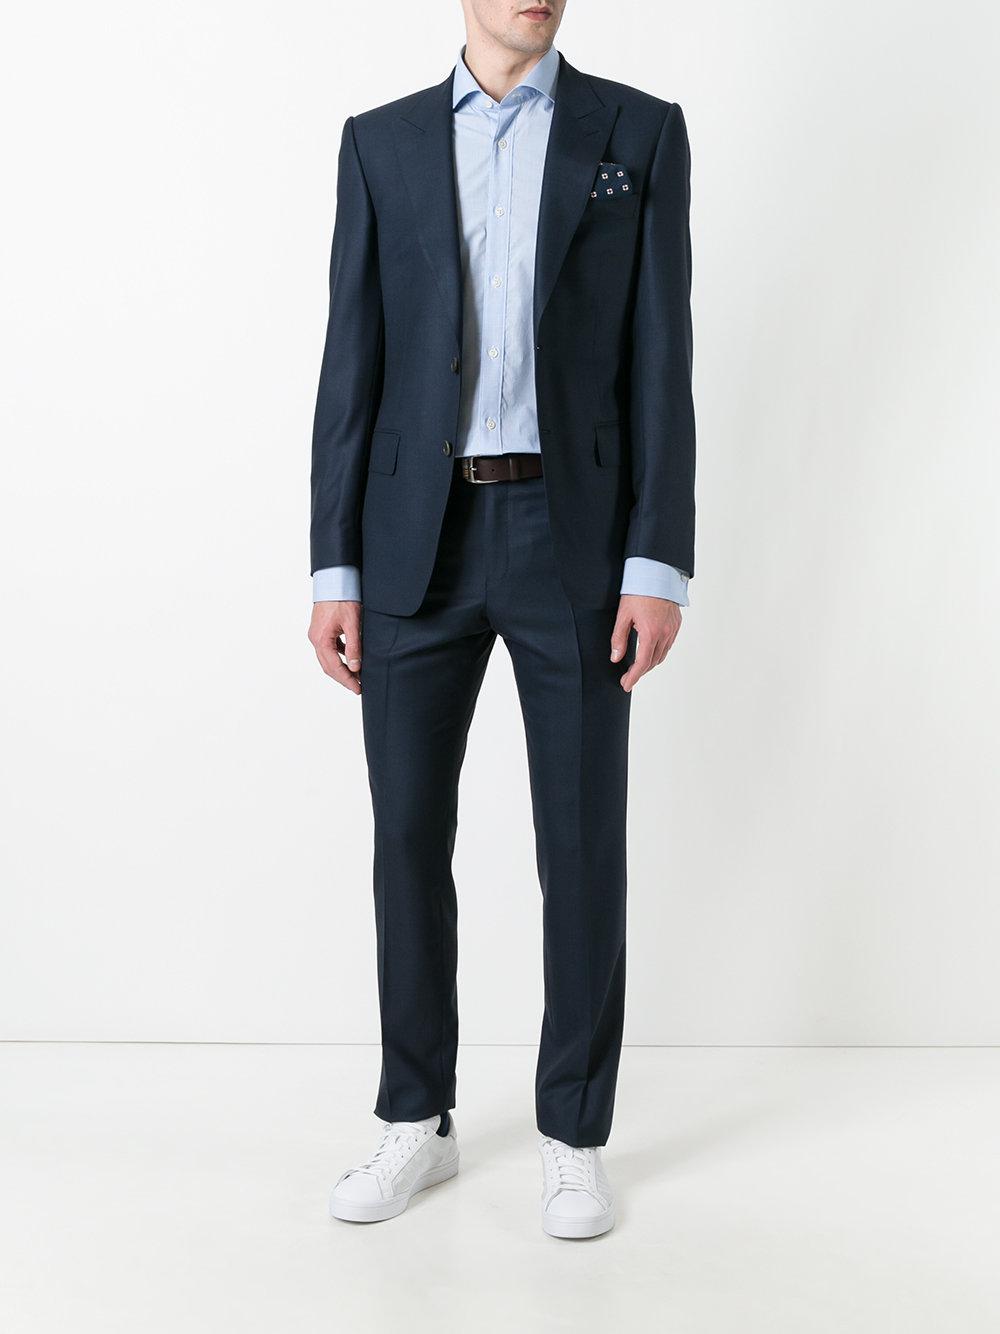 Lyst - Gieves & Hawkes Formal Suit in Blue for Men